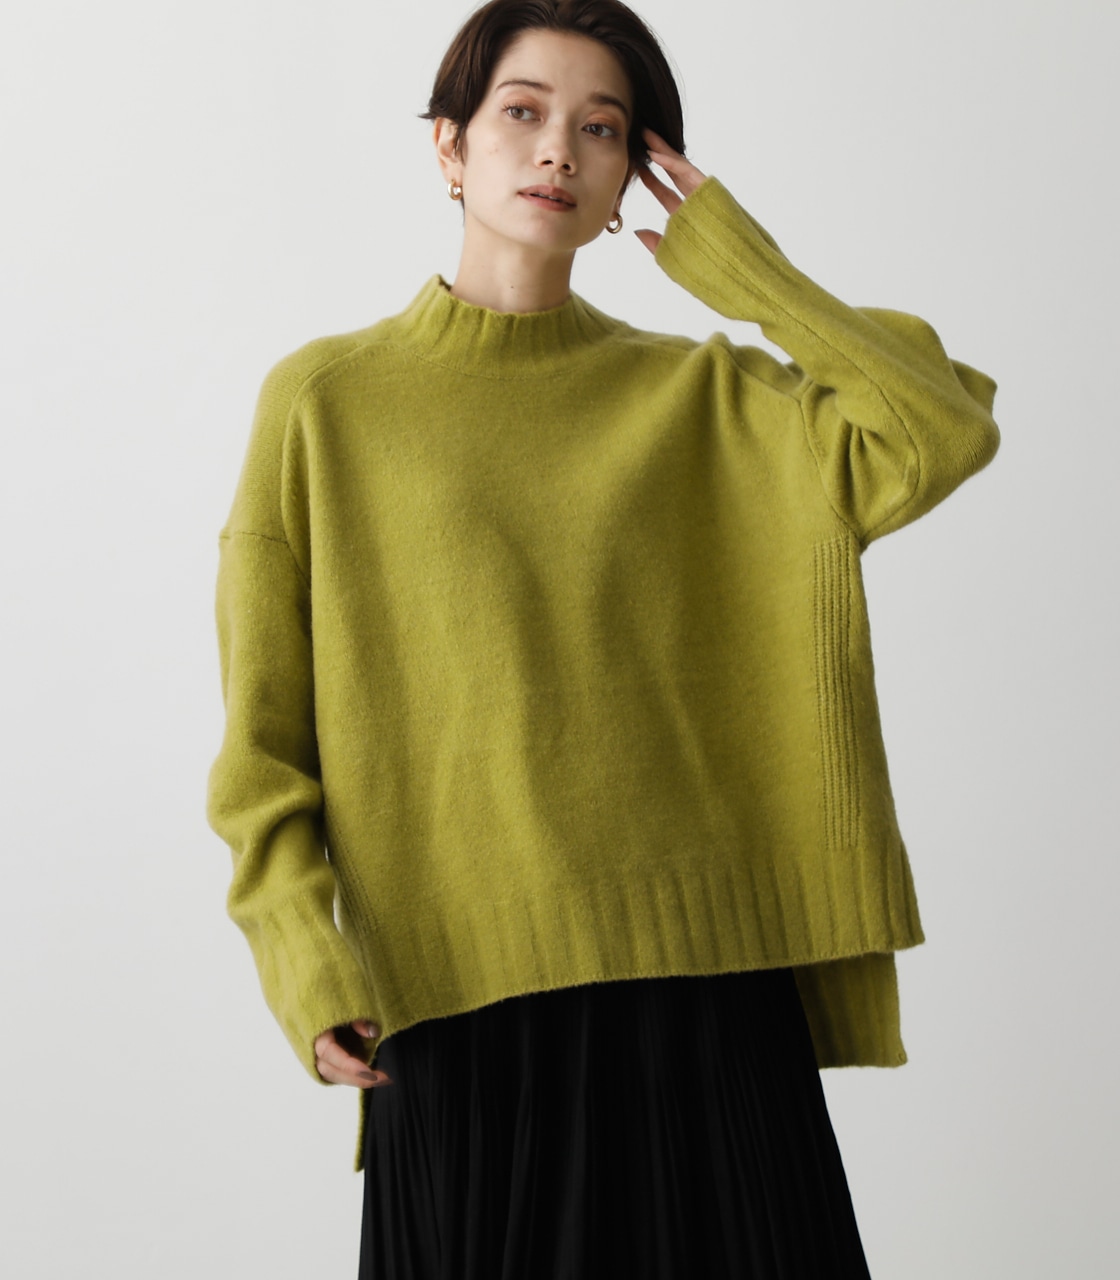 SOFT TOUCH HIGH NECK KNIT TOPS/ソフトタッチハイネックニットトップス 詳細画像 LIME 3